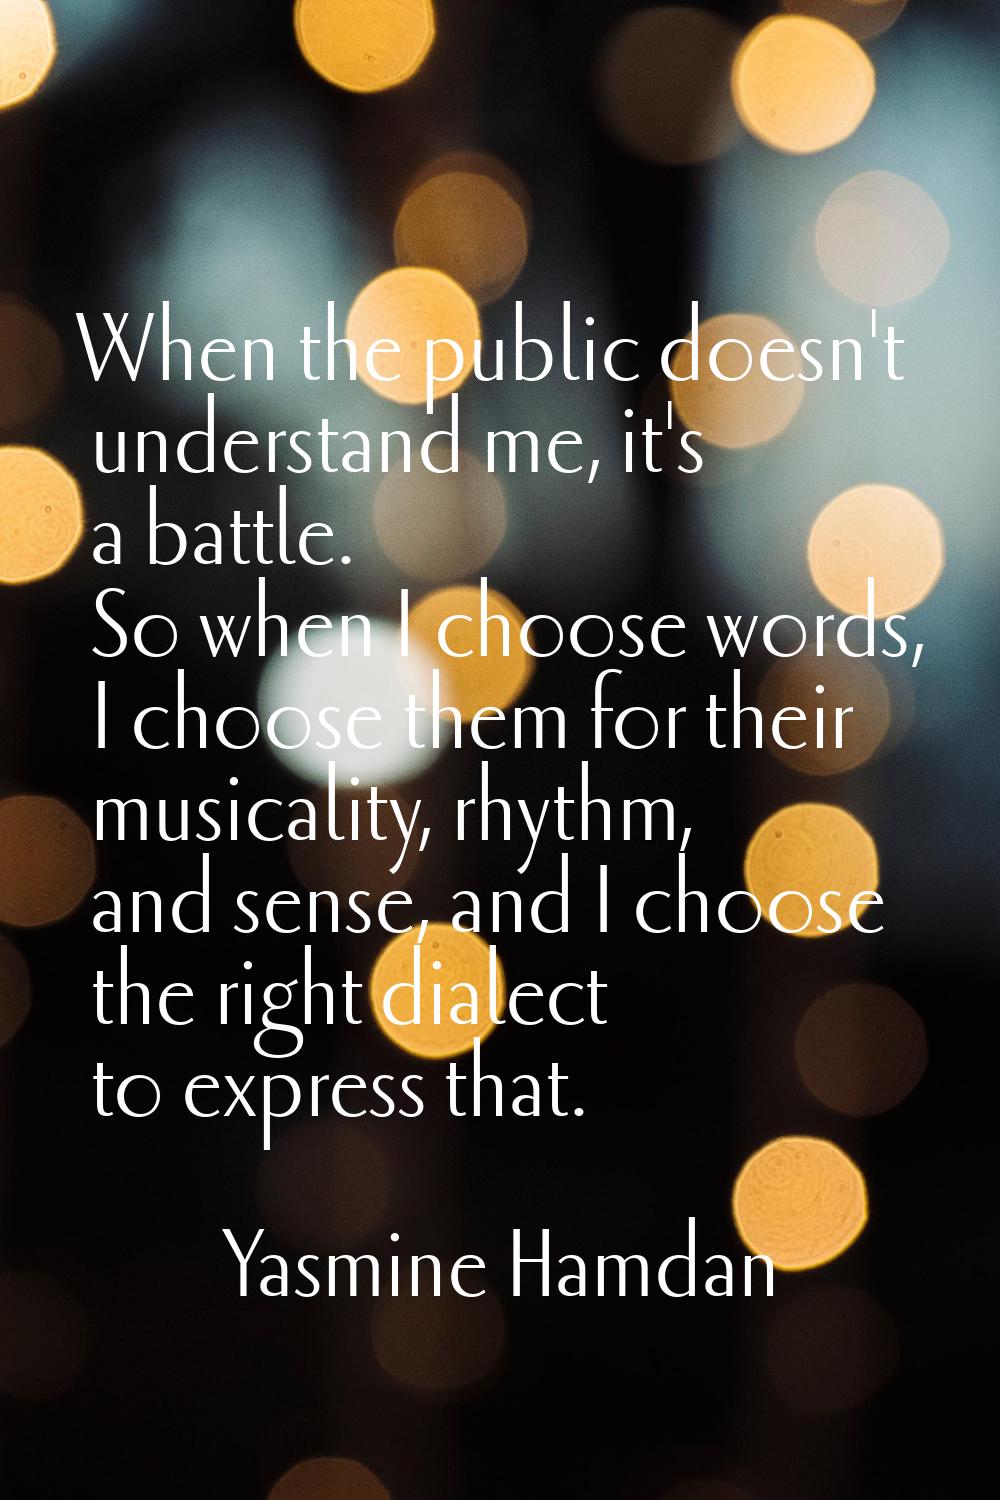 When the public doesn't understand me, it's a battle. So when I choose words, I choose them for the